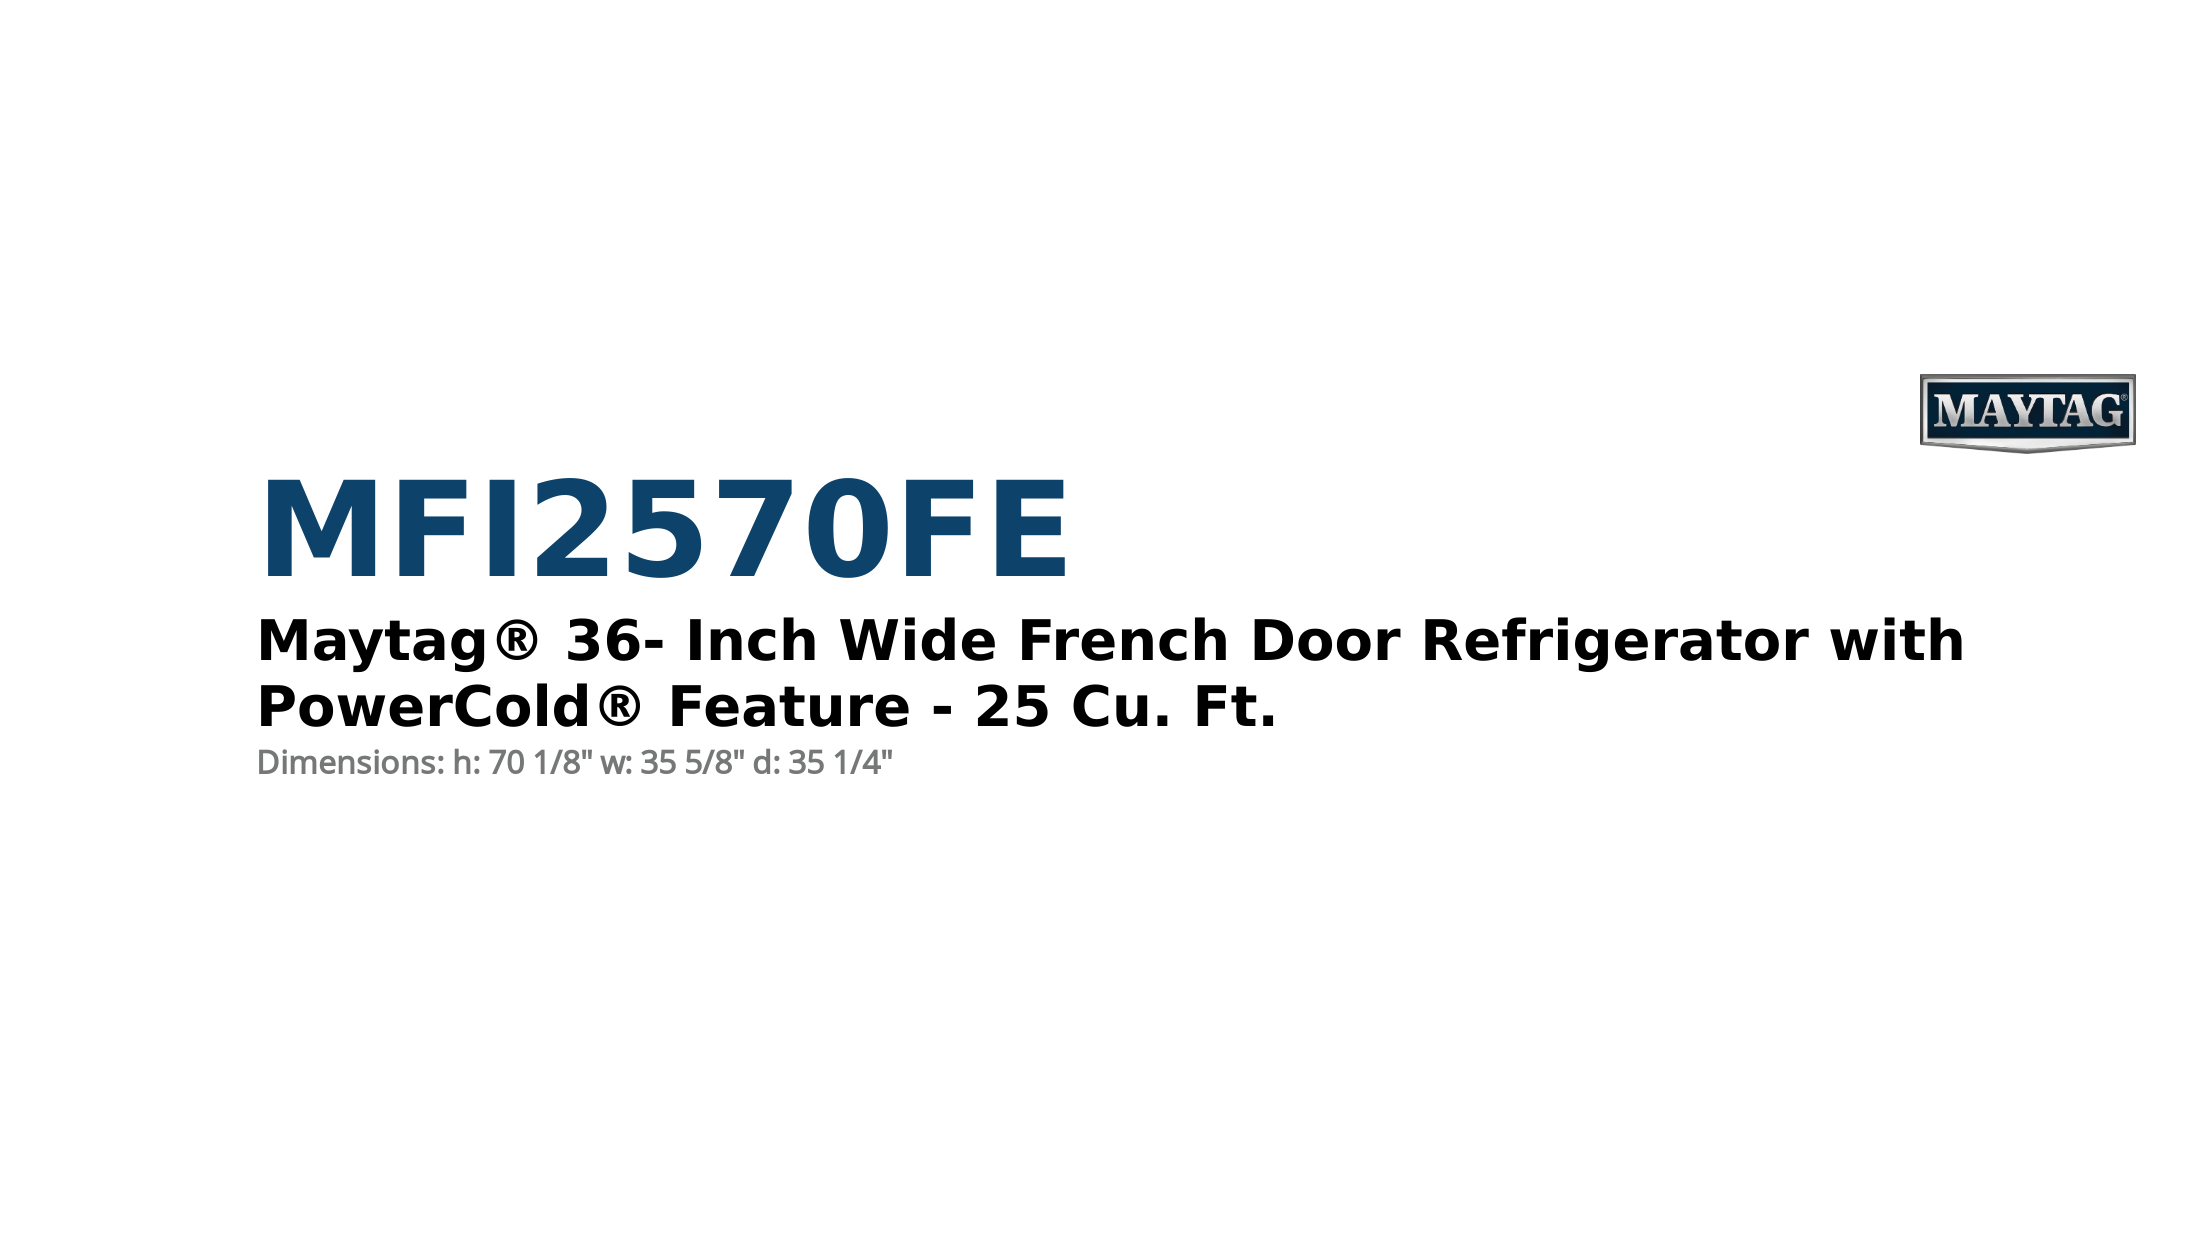 Maytag® 36- Inch Wide French Door Refrigerator with PowerCold® Feature - 25 Cu. Ft.